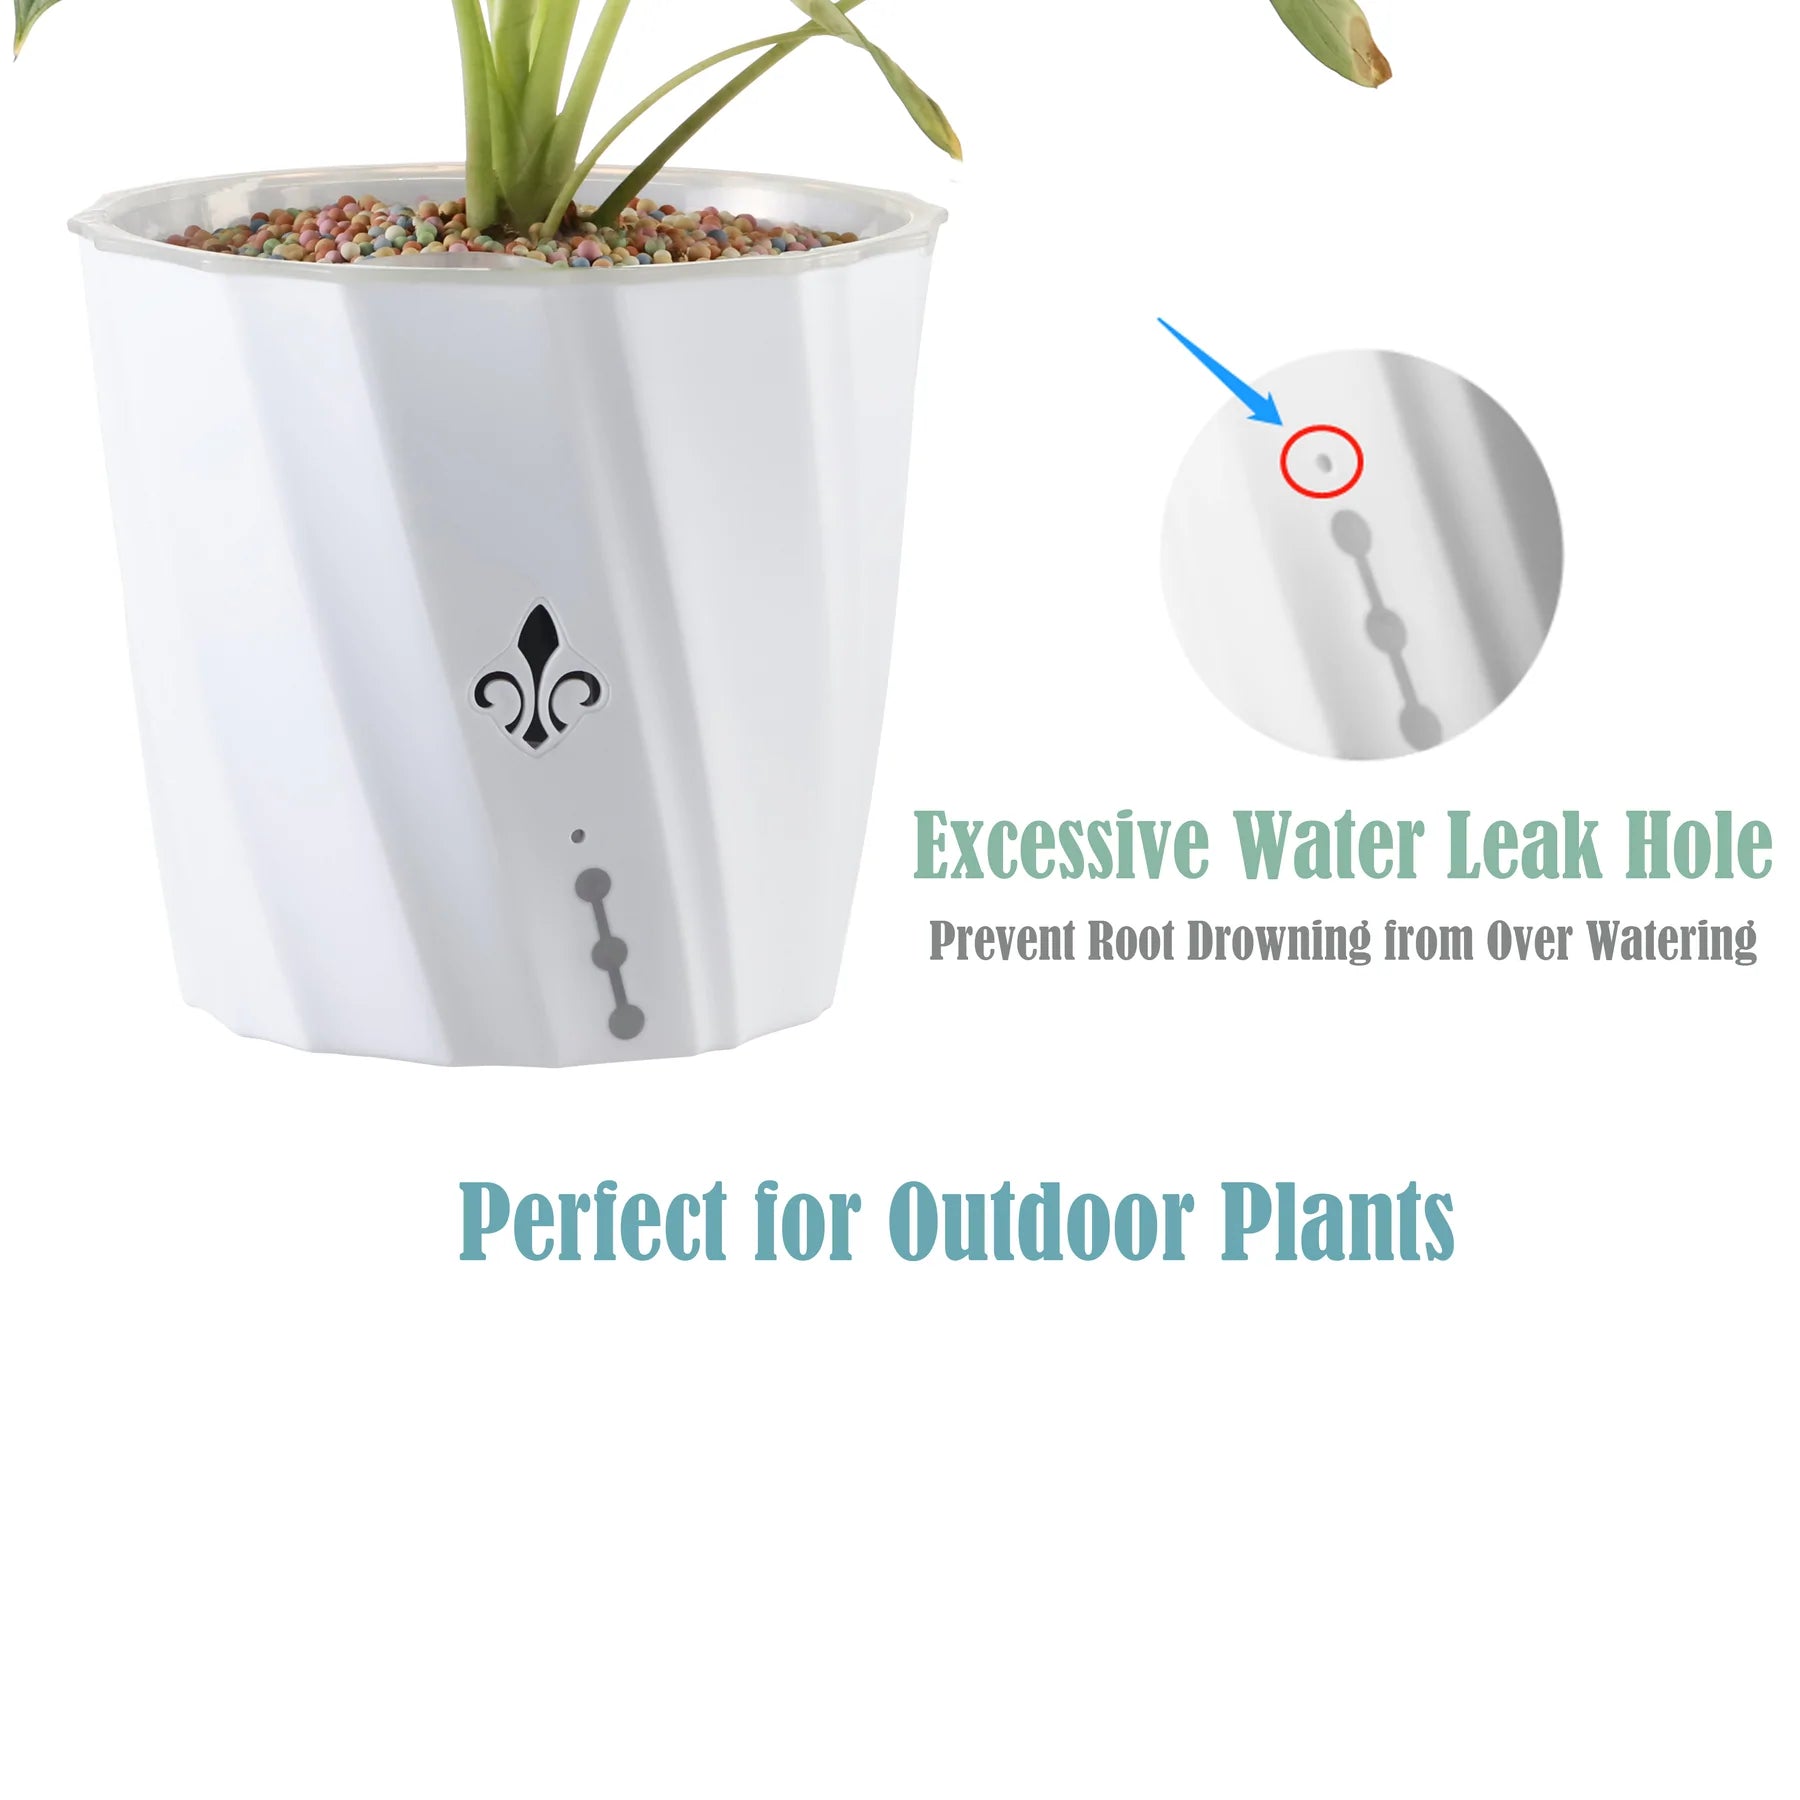 self watering planter perfect for outdoor plants due to hole for excessive water